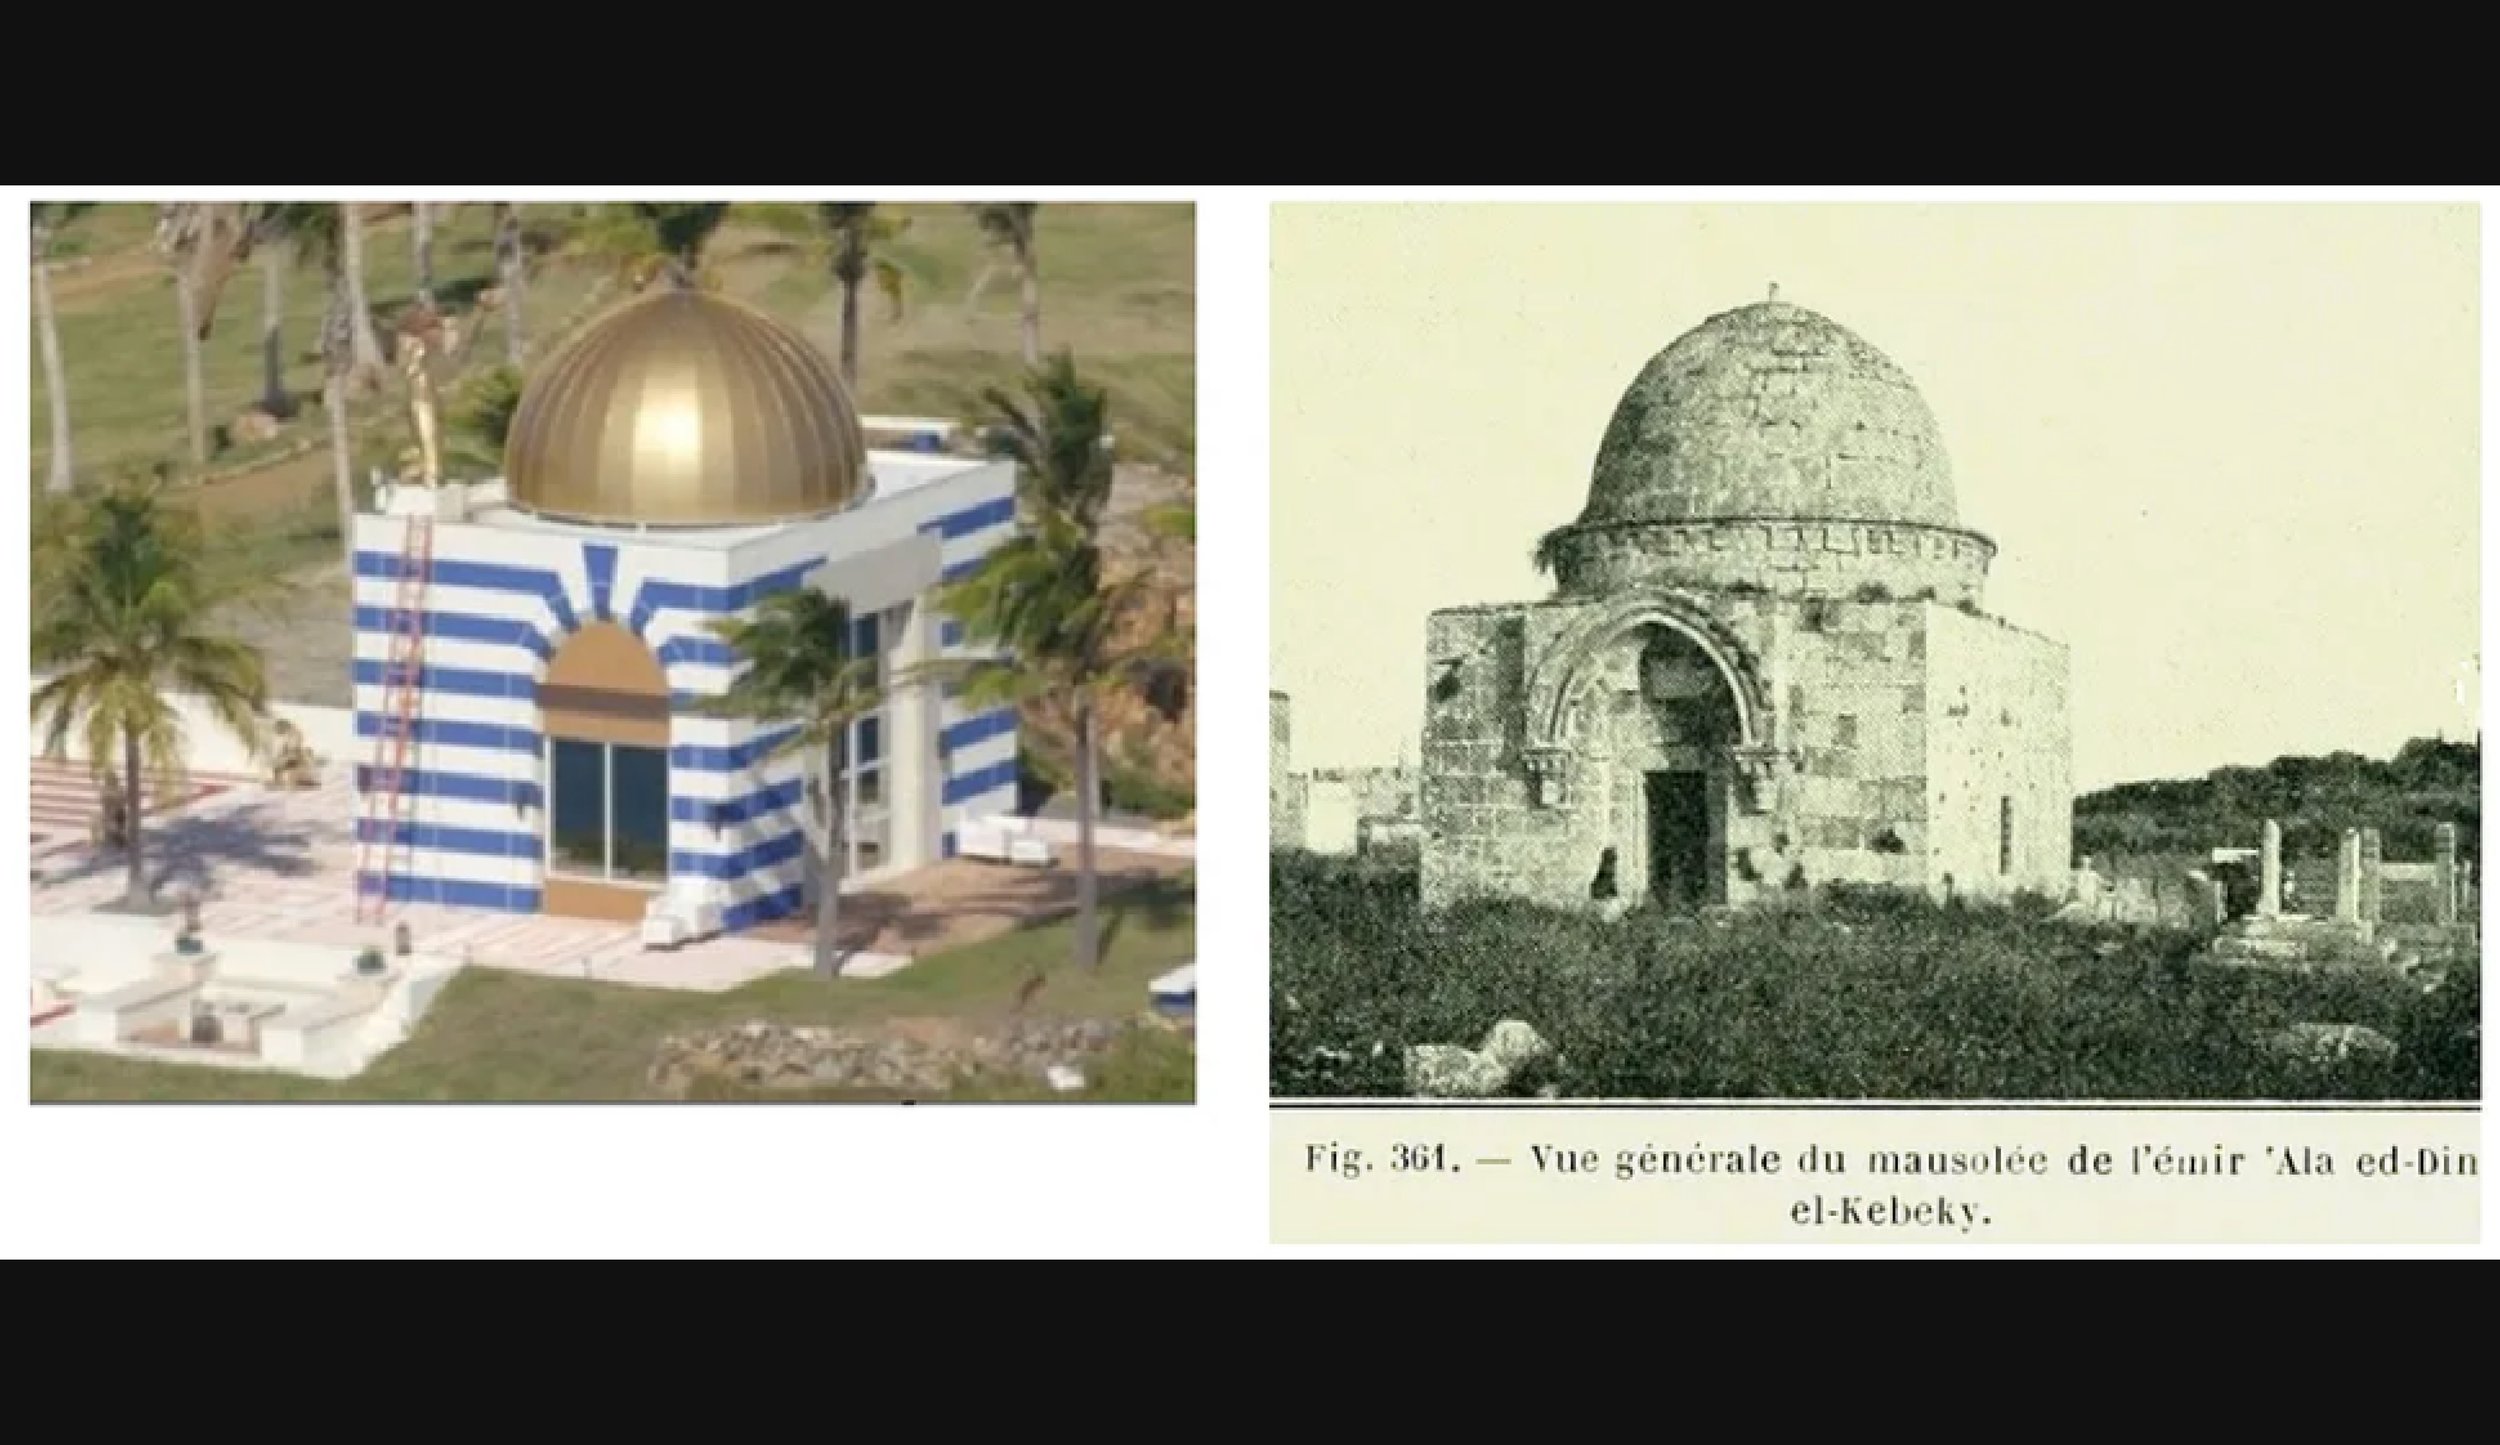  The temple and the one in Jerusalem 